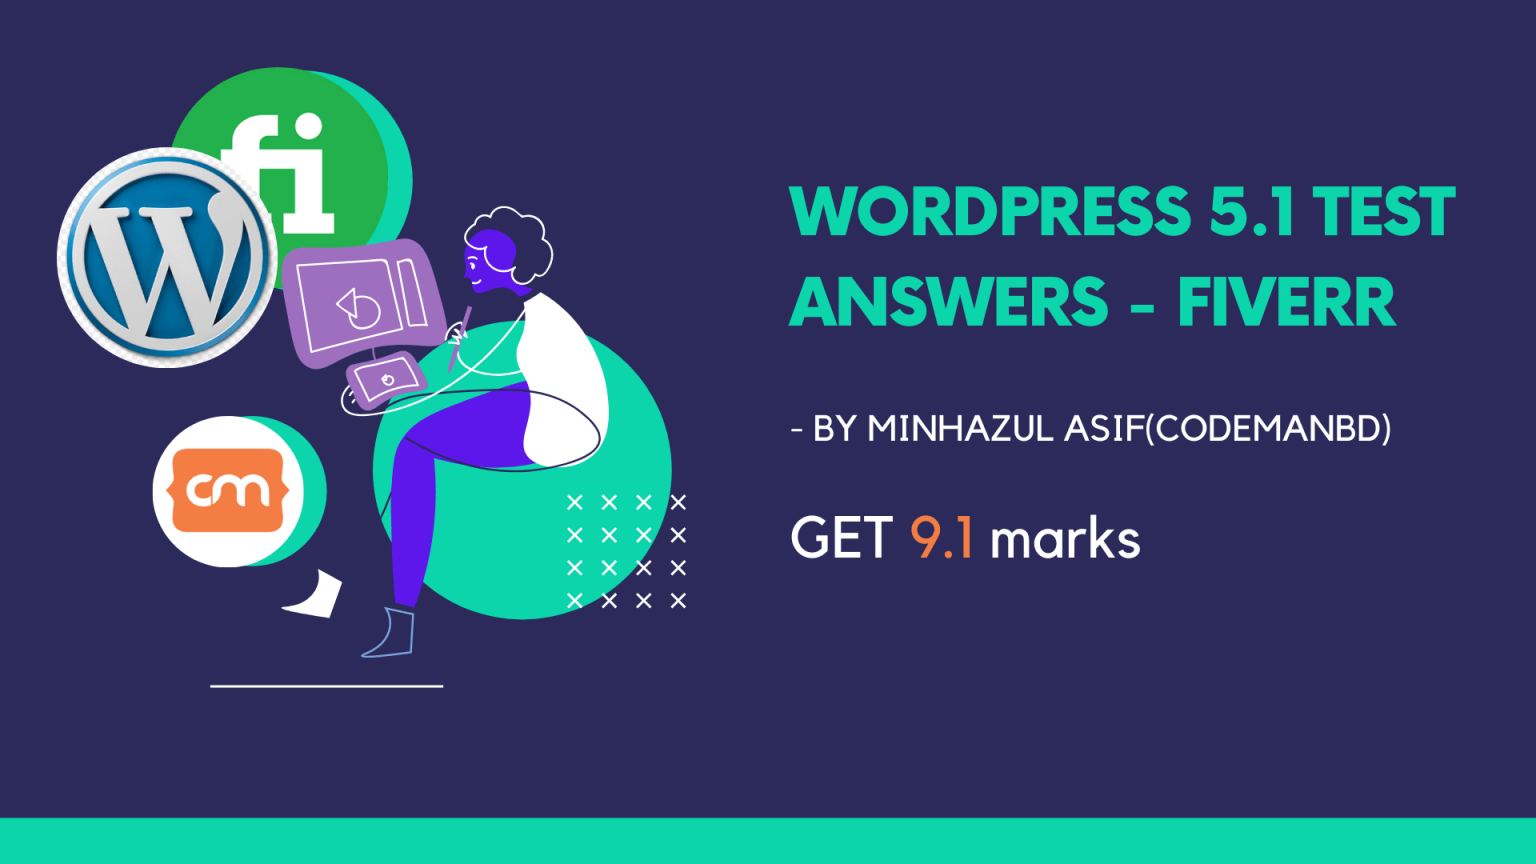 Fiverr WordPress Test 5.1 Answers 2021 with 9.1 score